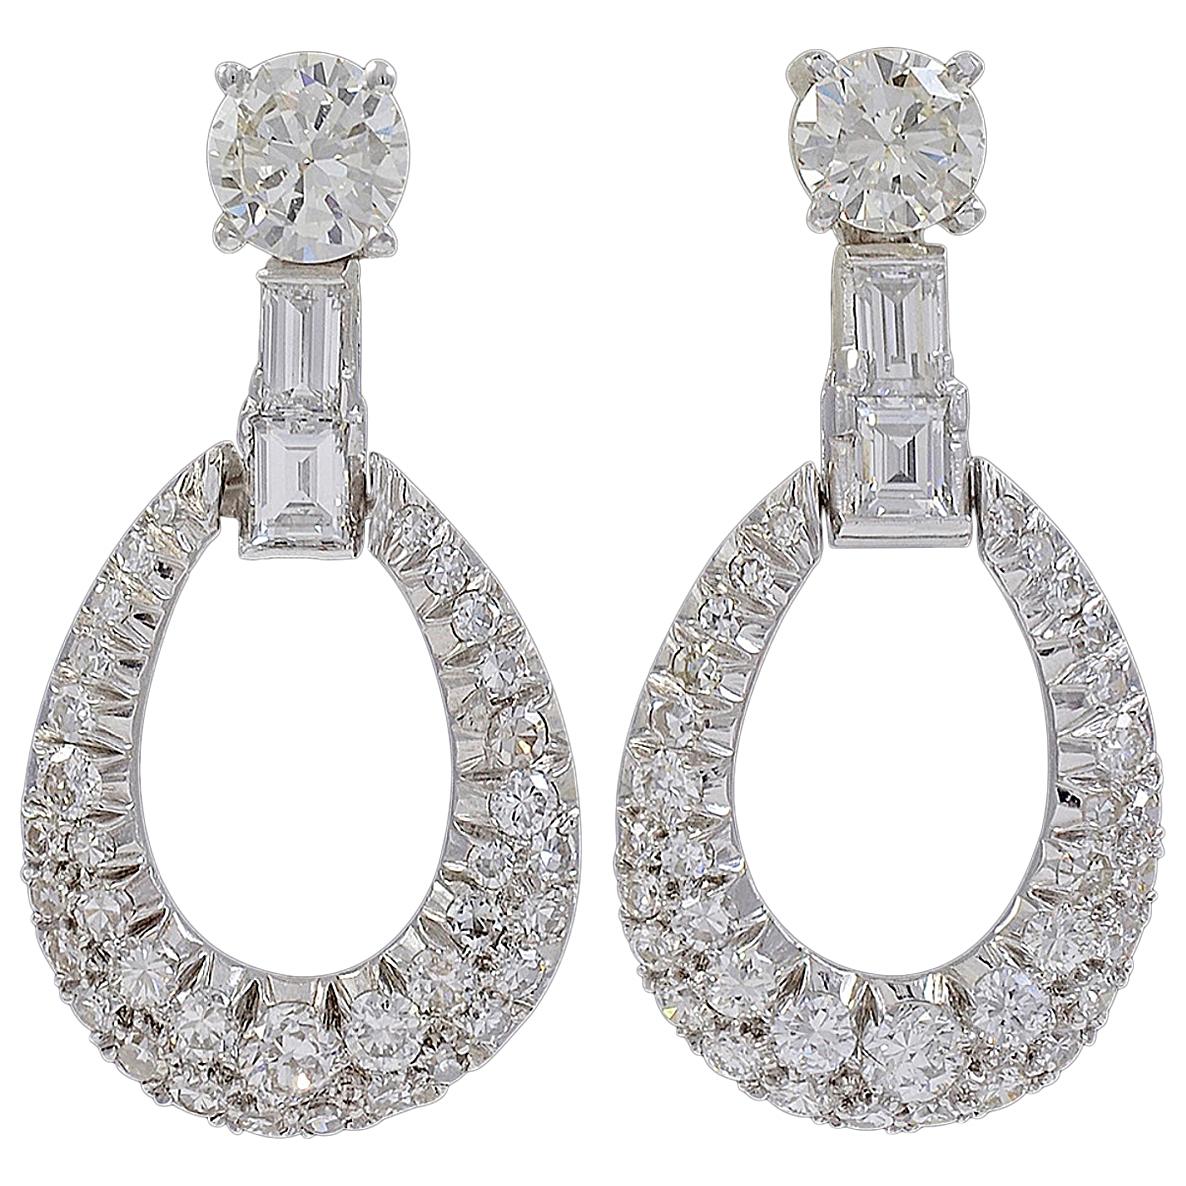 1950s 7 Ct Diamond Drop Cocktail Earrings Platinum with 2 Ct Solitaire Diamond